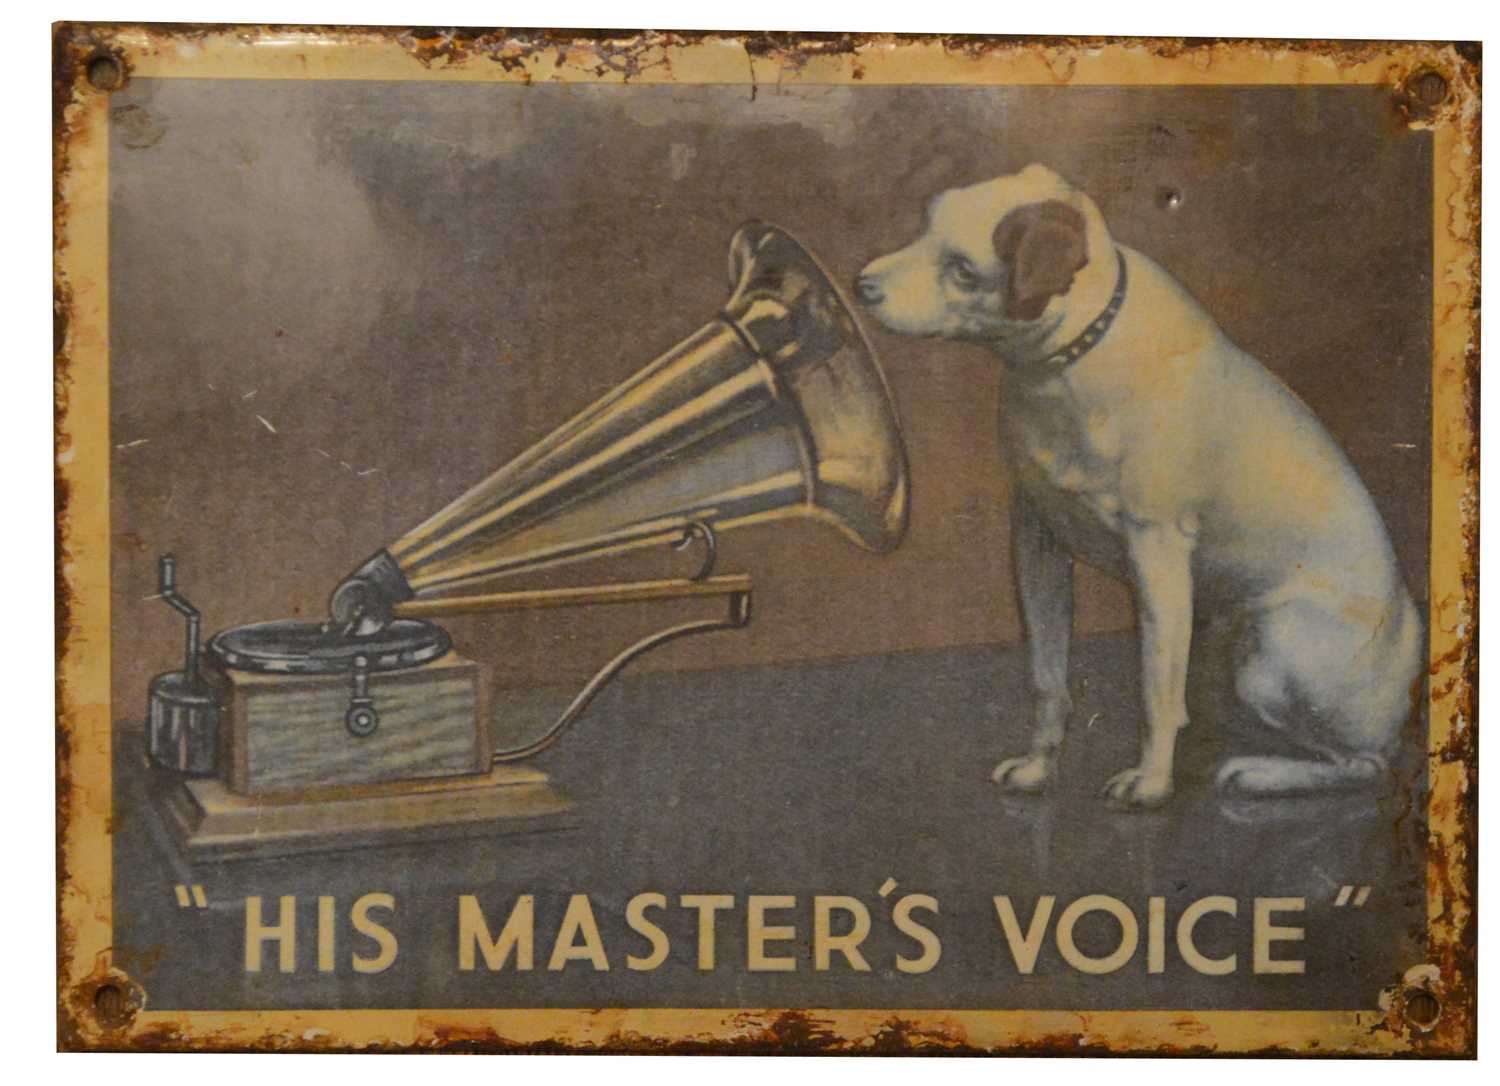 Lot 753 - His Master's Voice enamel advertising sign